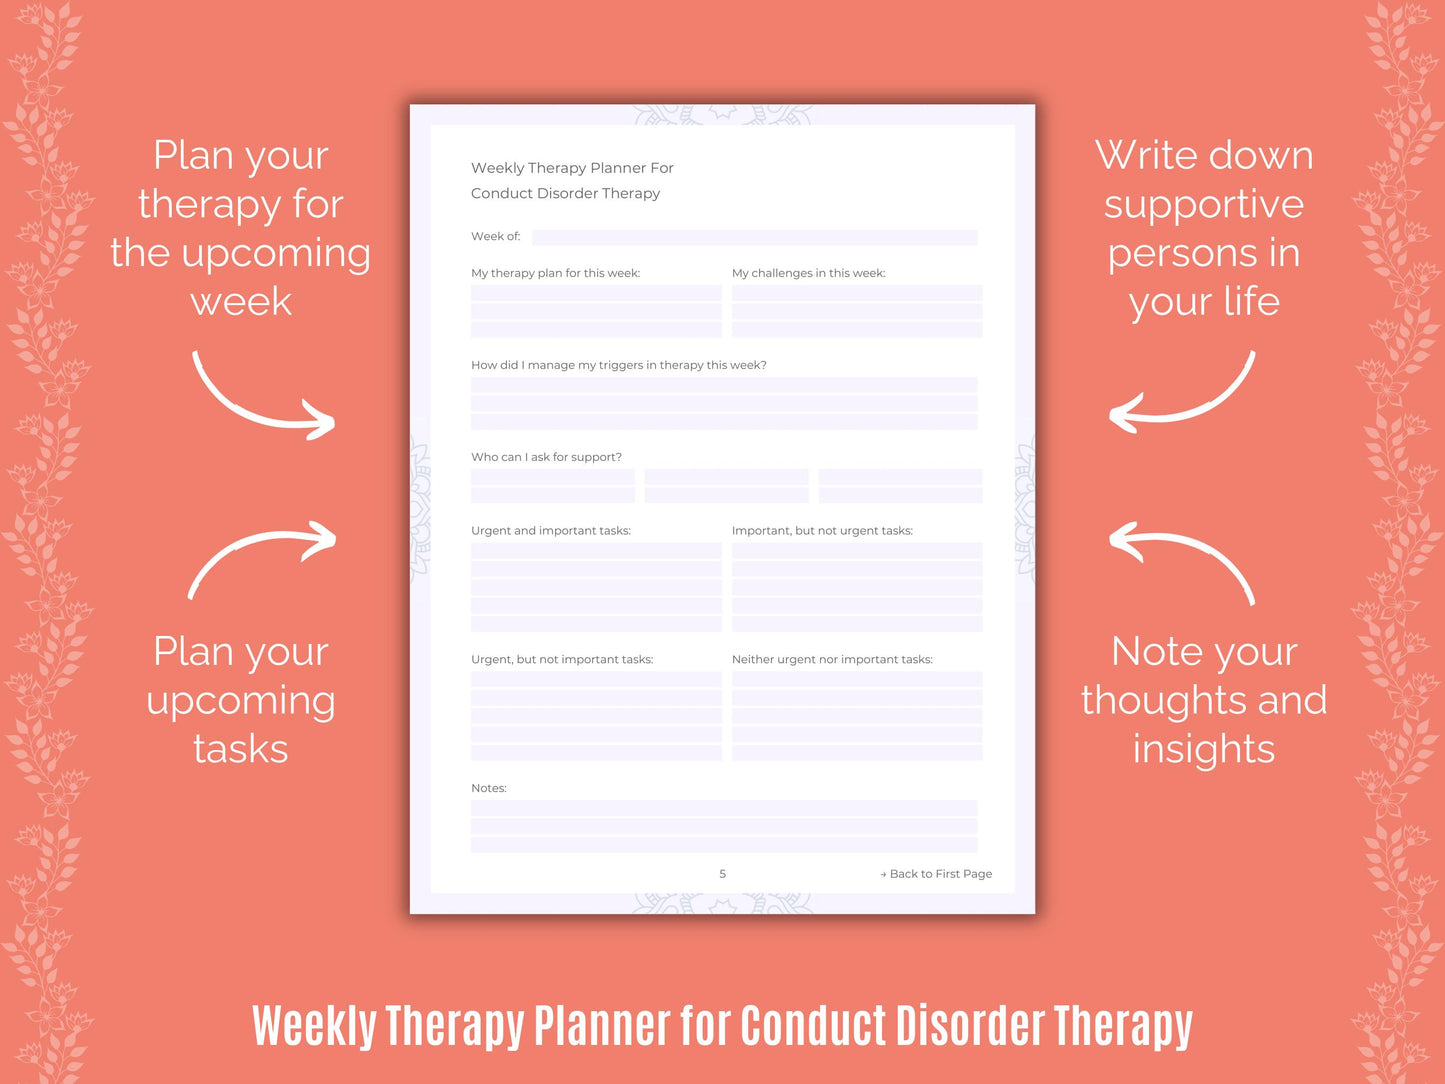 Conduct Journals, Conduct Planners, Conduct Cheat Sheet, Conduct Resources, Conduct Counseling, Conduct Templates, Disorder, Conduct Therapy, Conduct Journaling, Conduct Notes, Conduct Goal Setting, Conduct Workbooks, Conduct Tools